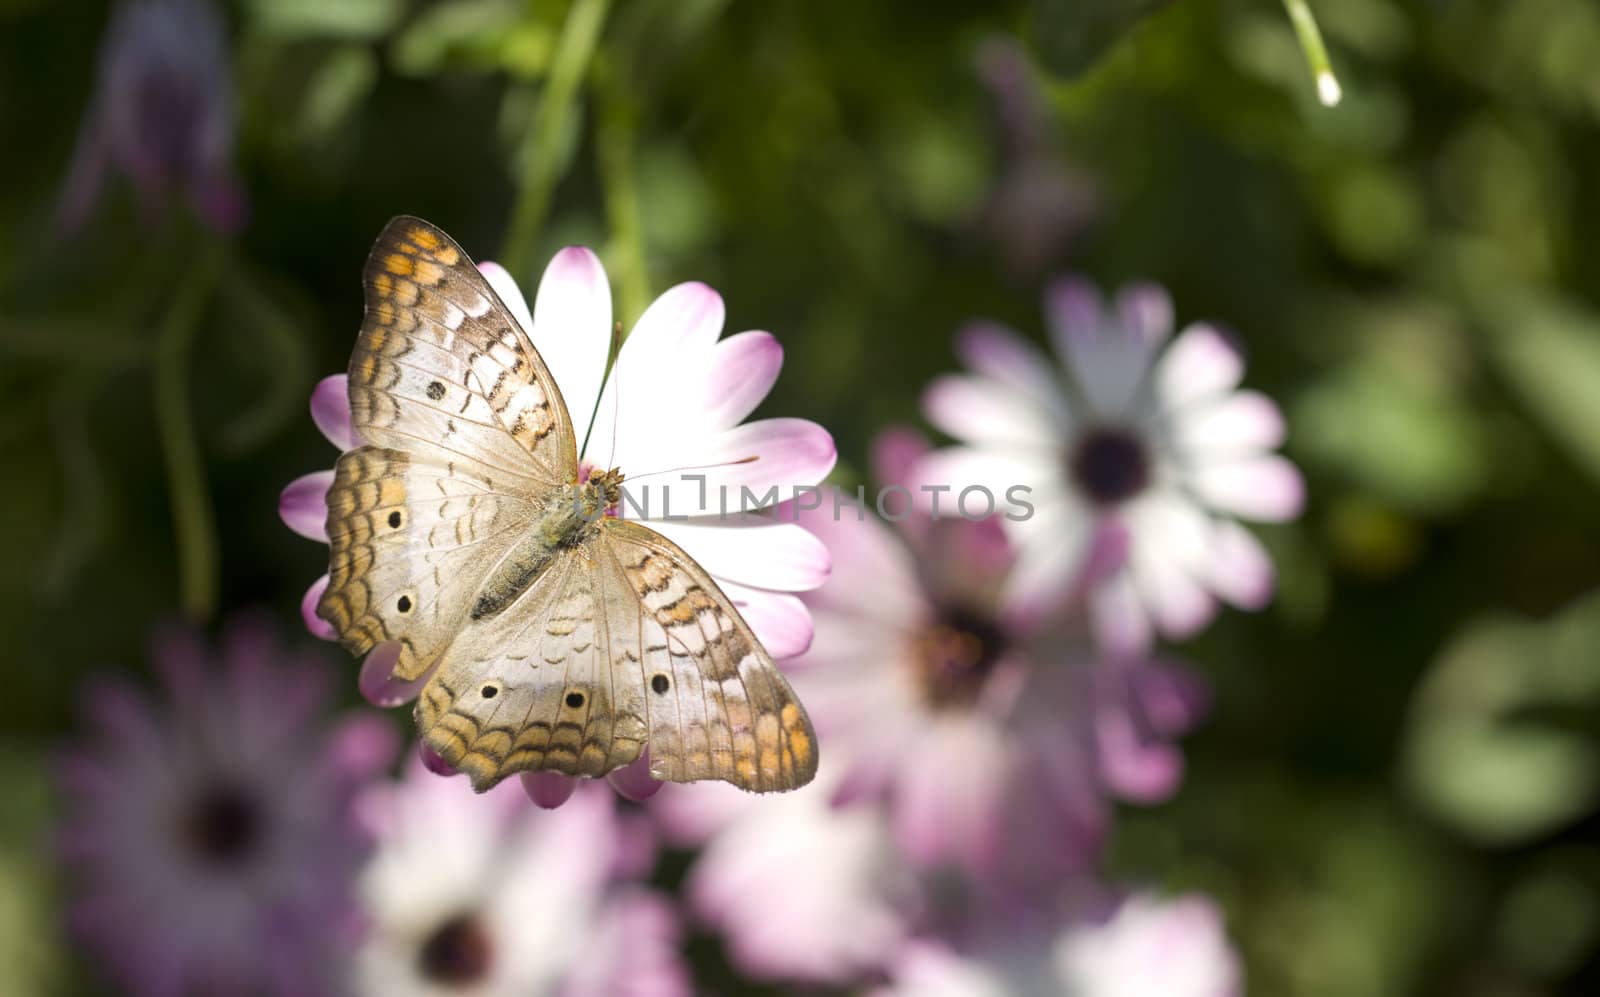 A White Peacock butterfly lands on a flower